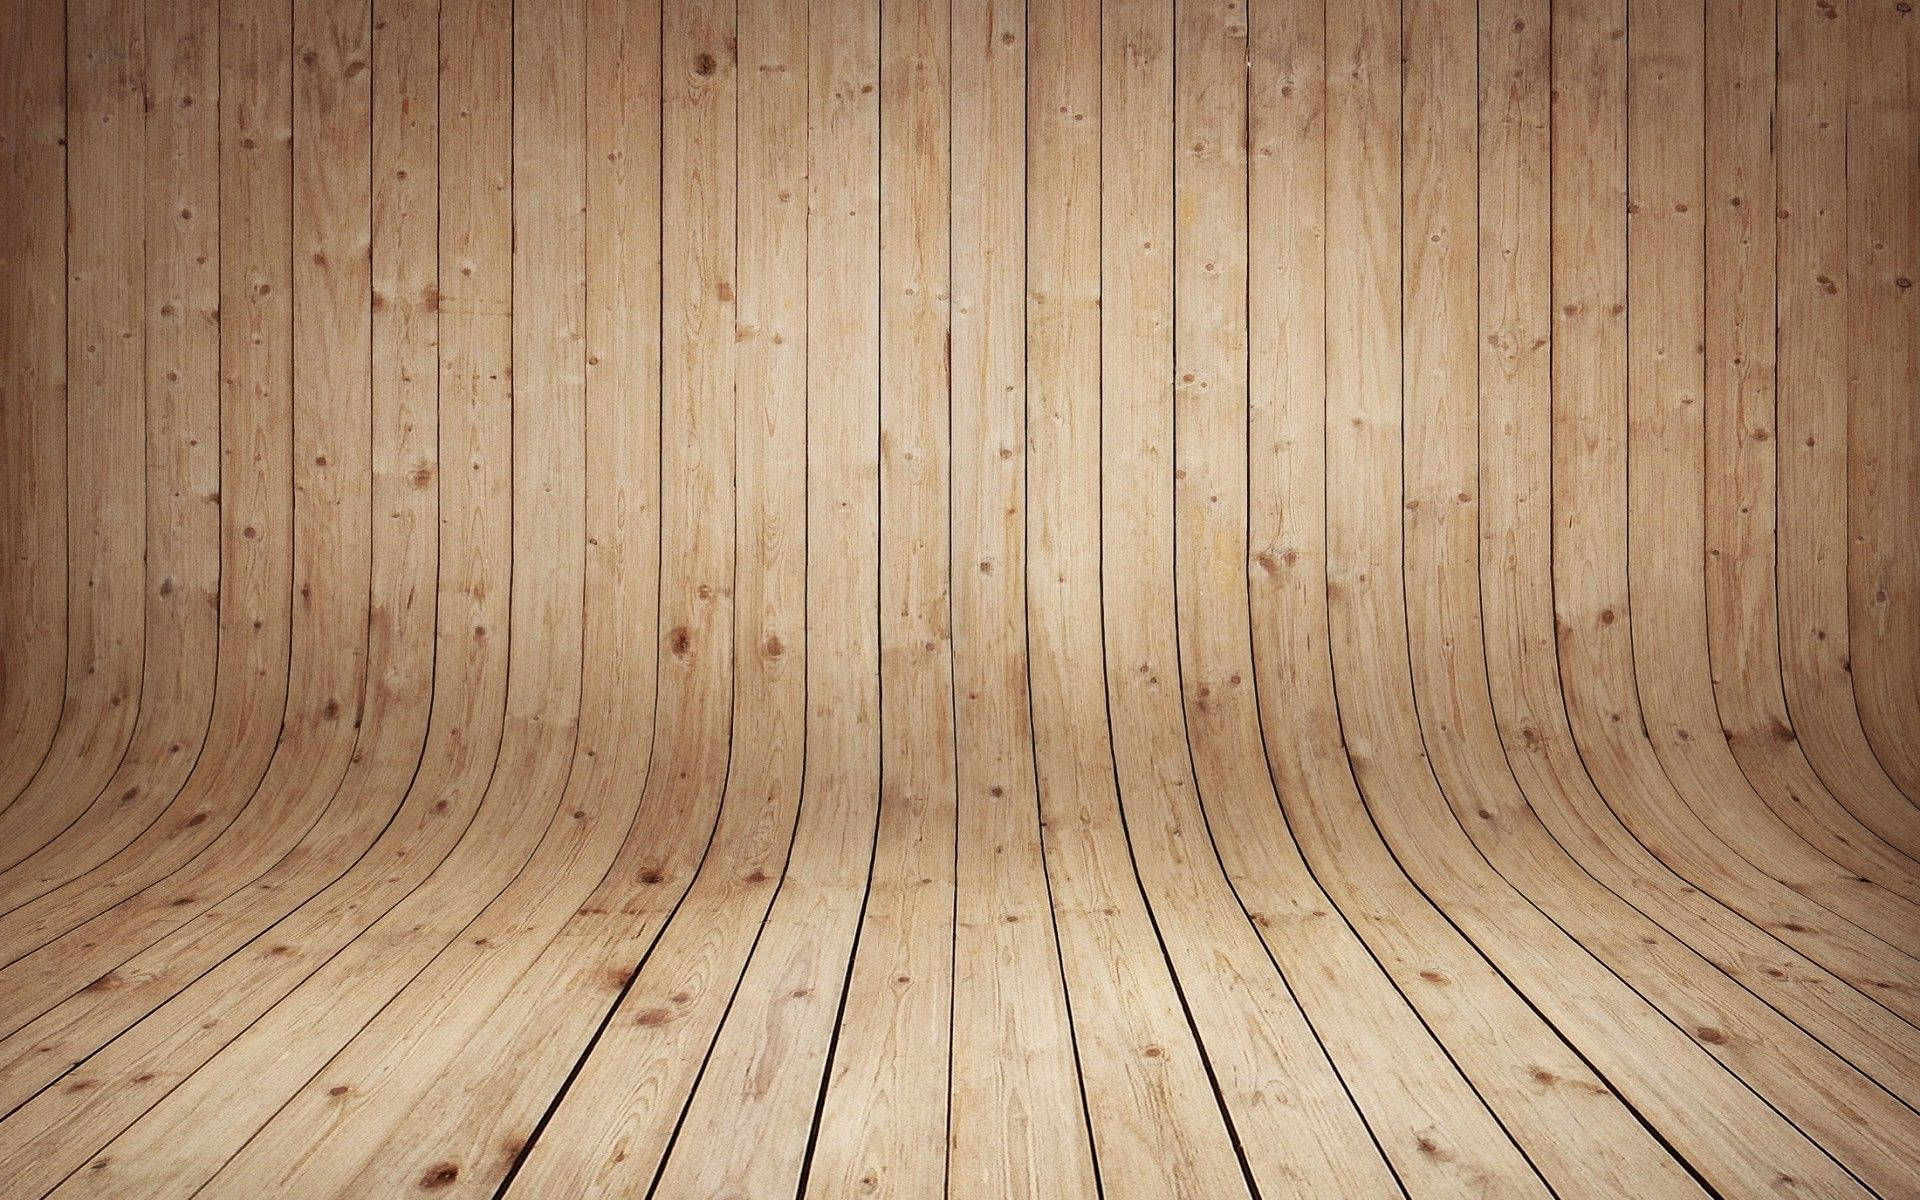 Curved Wood Background